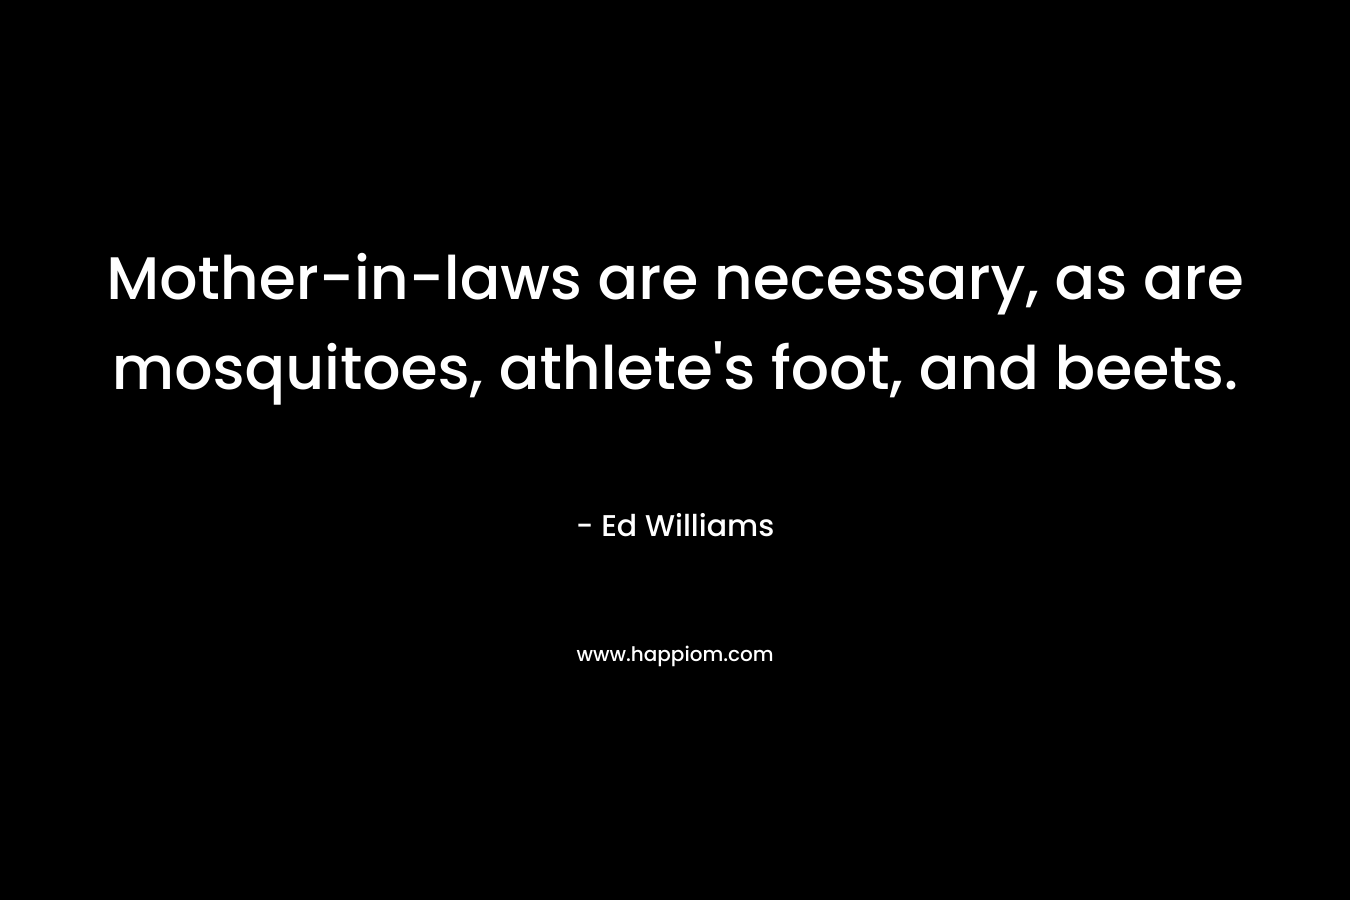 Mother-in-laws are necessary, as are mosquitoes, athlete’s foot, and beets. – Ed Williams